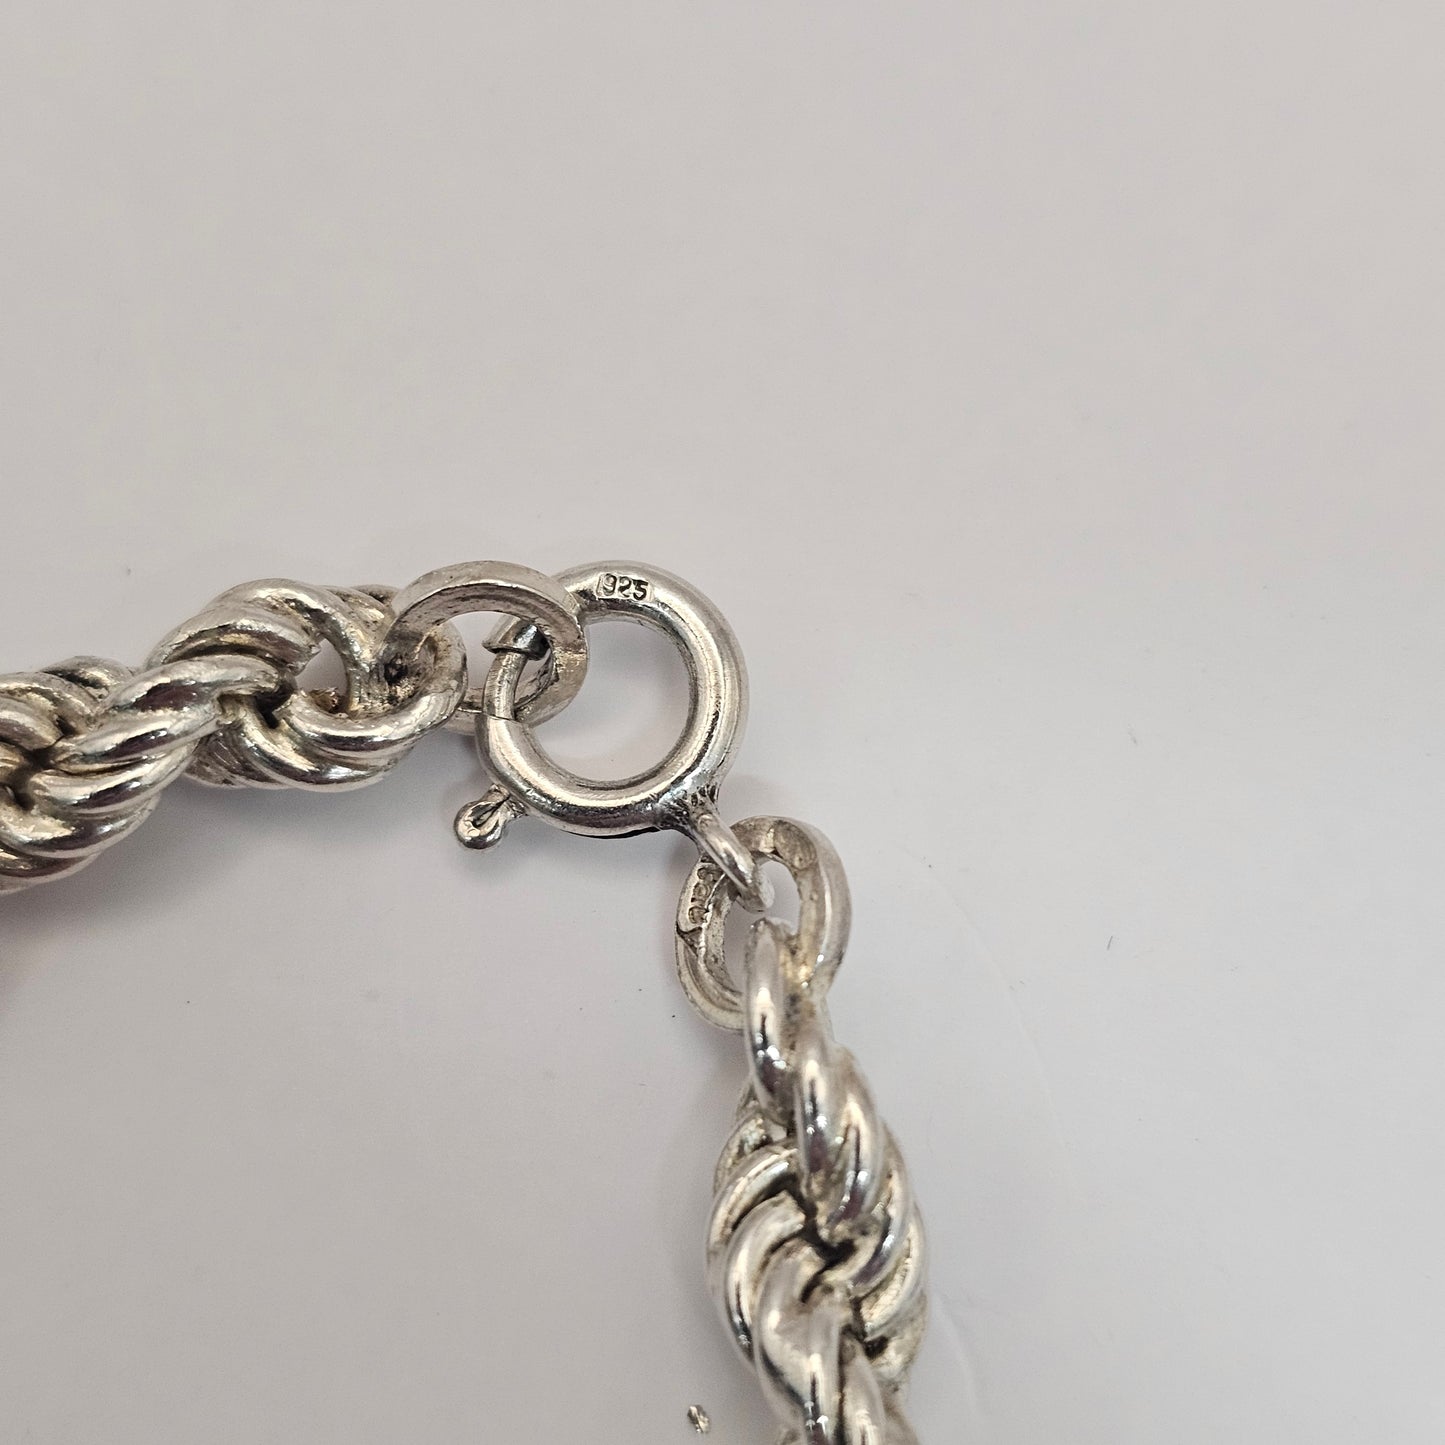 Twisted rope silver chain